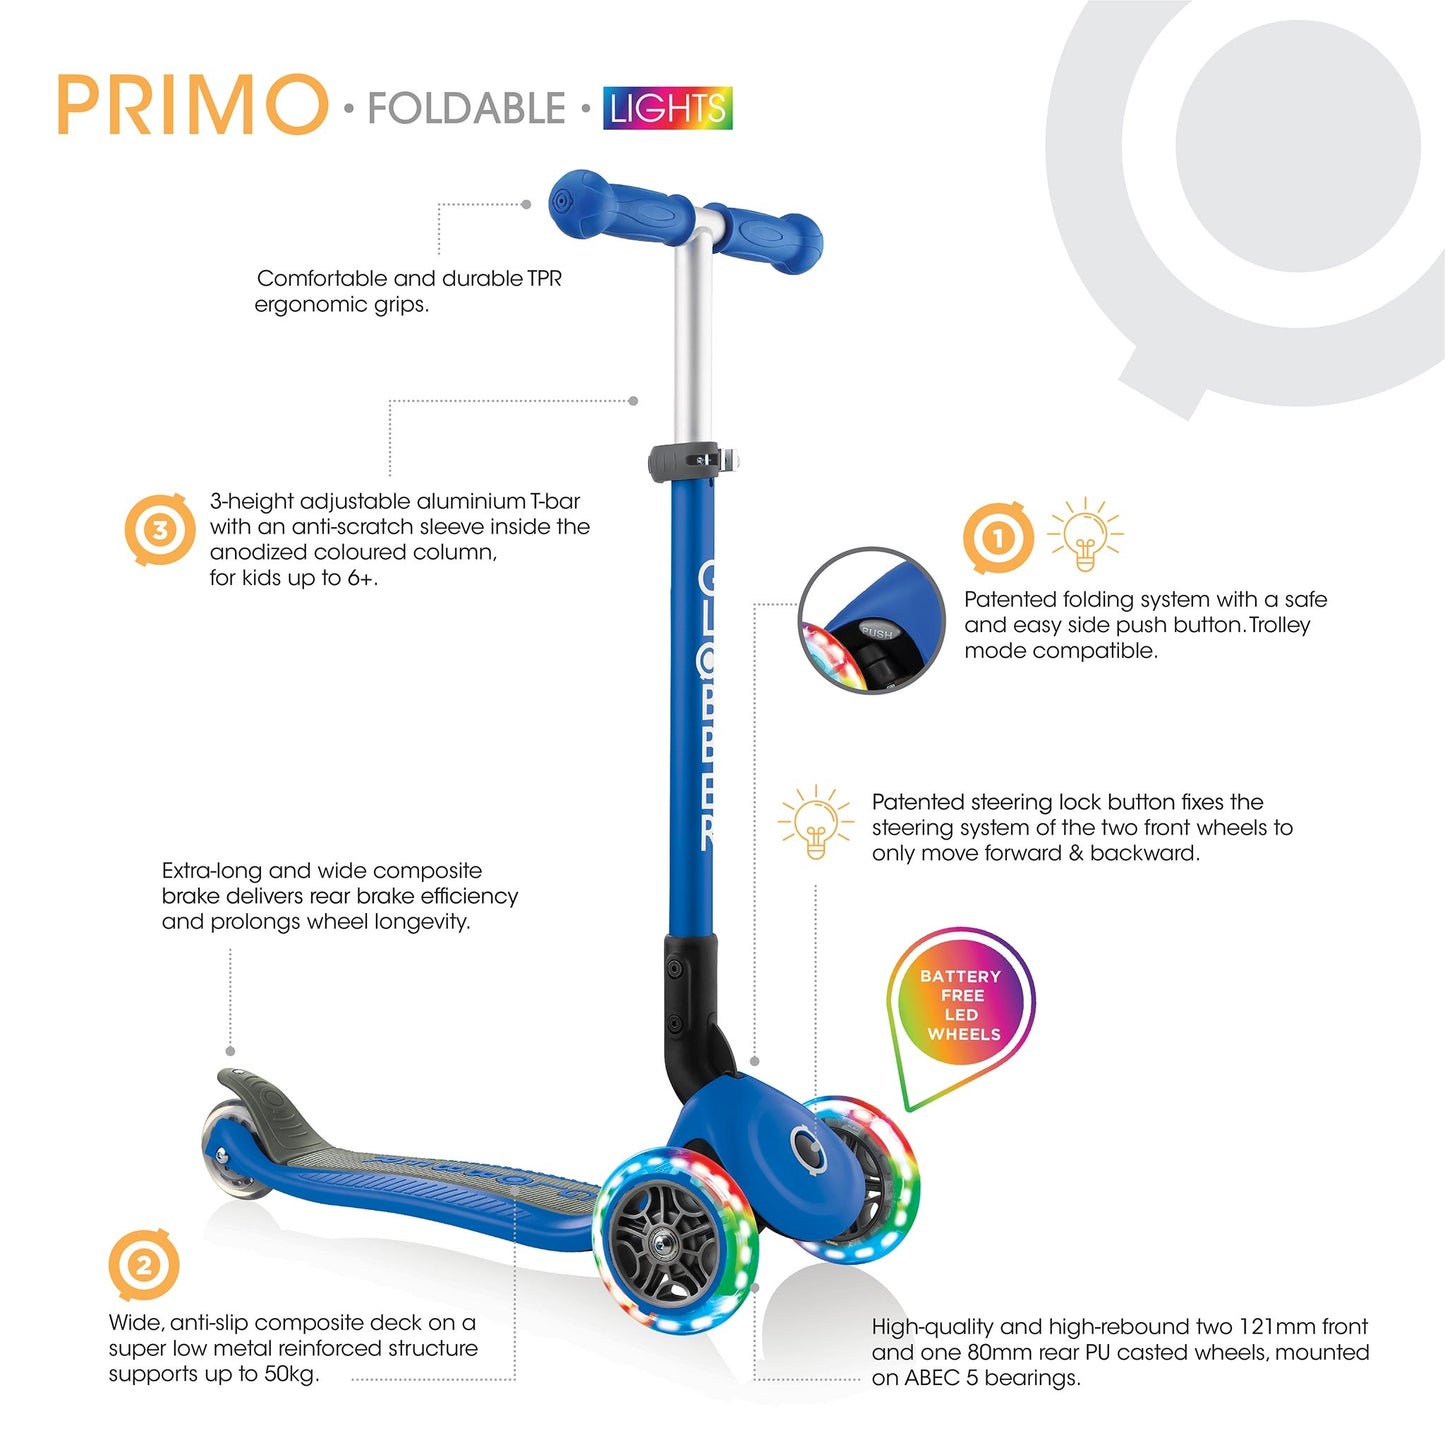 Patinete Globber con luces - Primo Foldable Lights Rosa